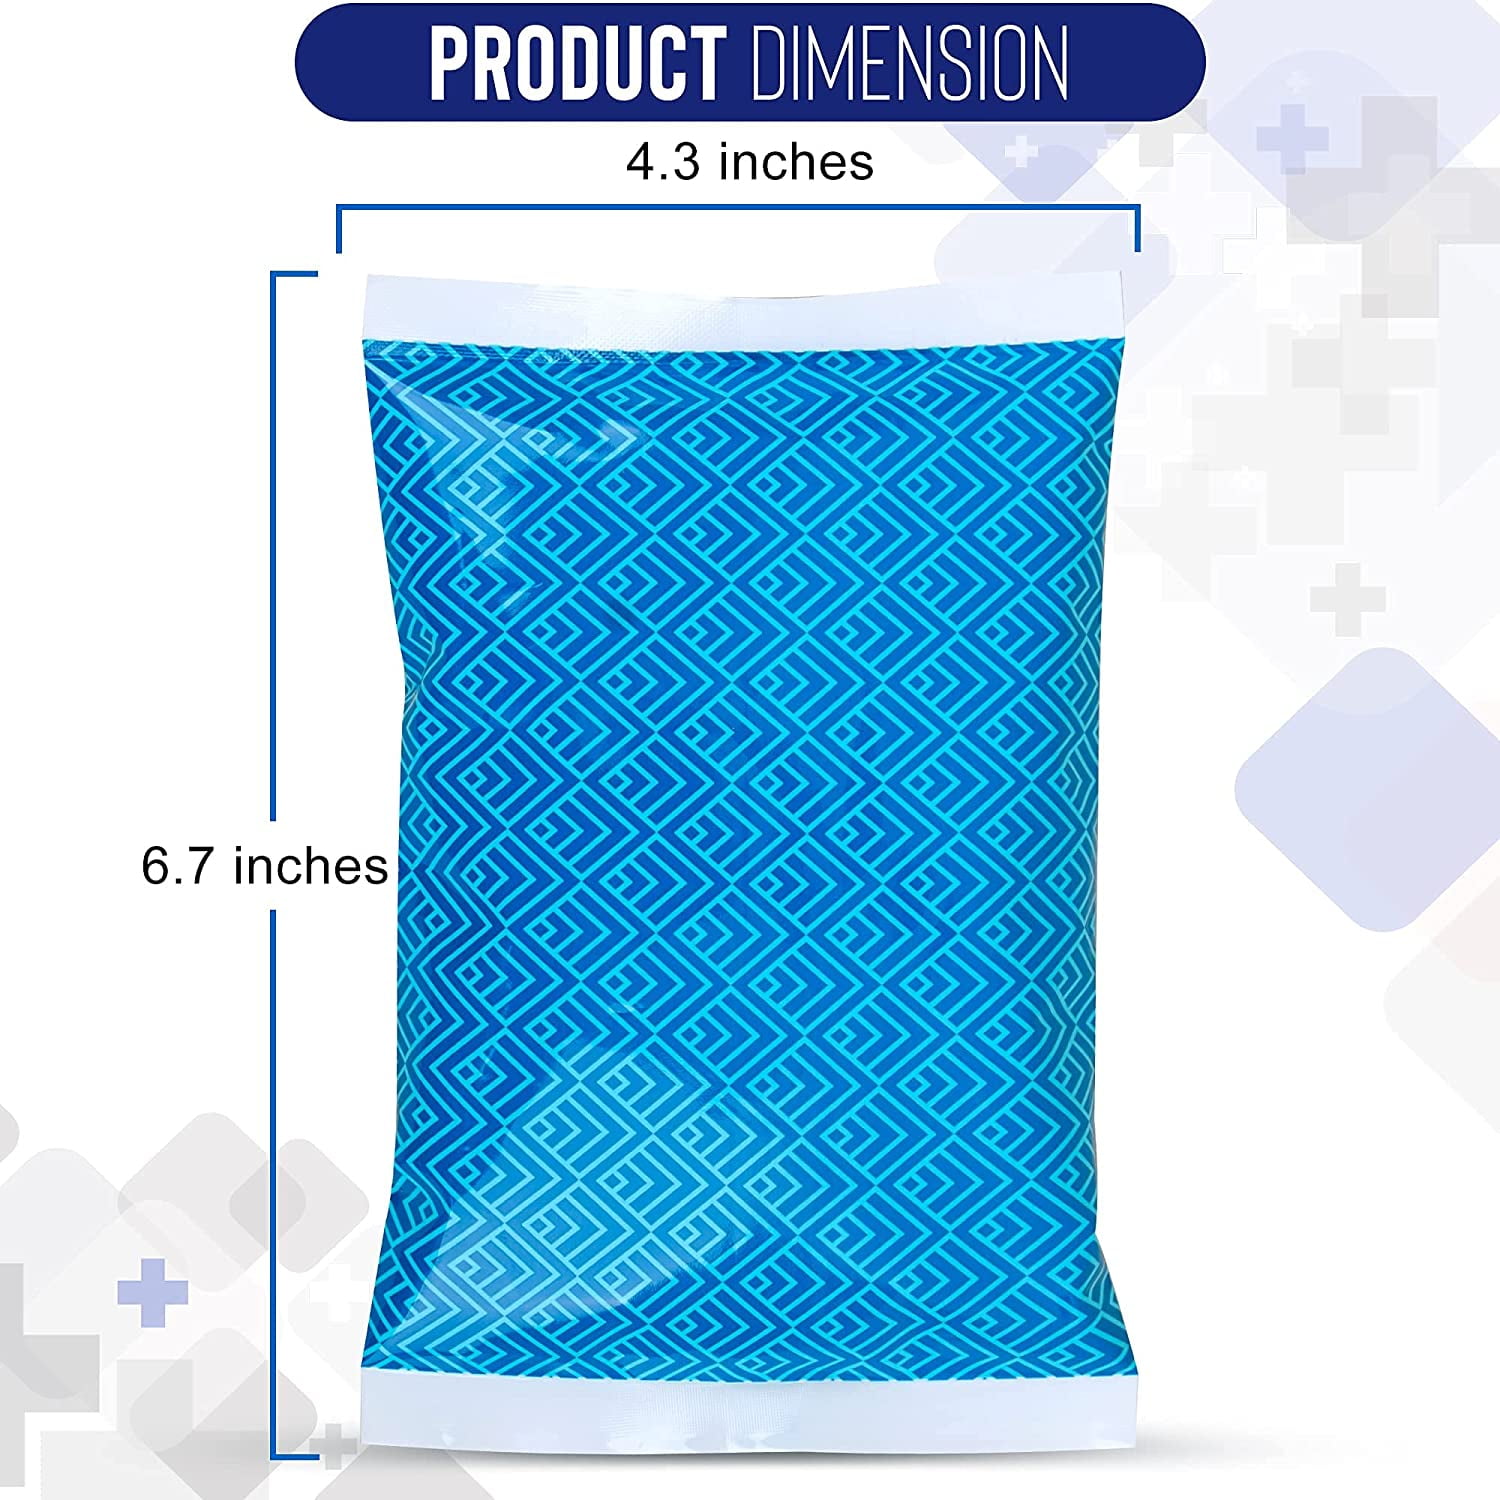 Basics Reusable Hard Sided Rectangular Ice Pack, 6.5 inch x 4.3 inch x 1.2 inch, Blue, Pack of 4